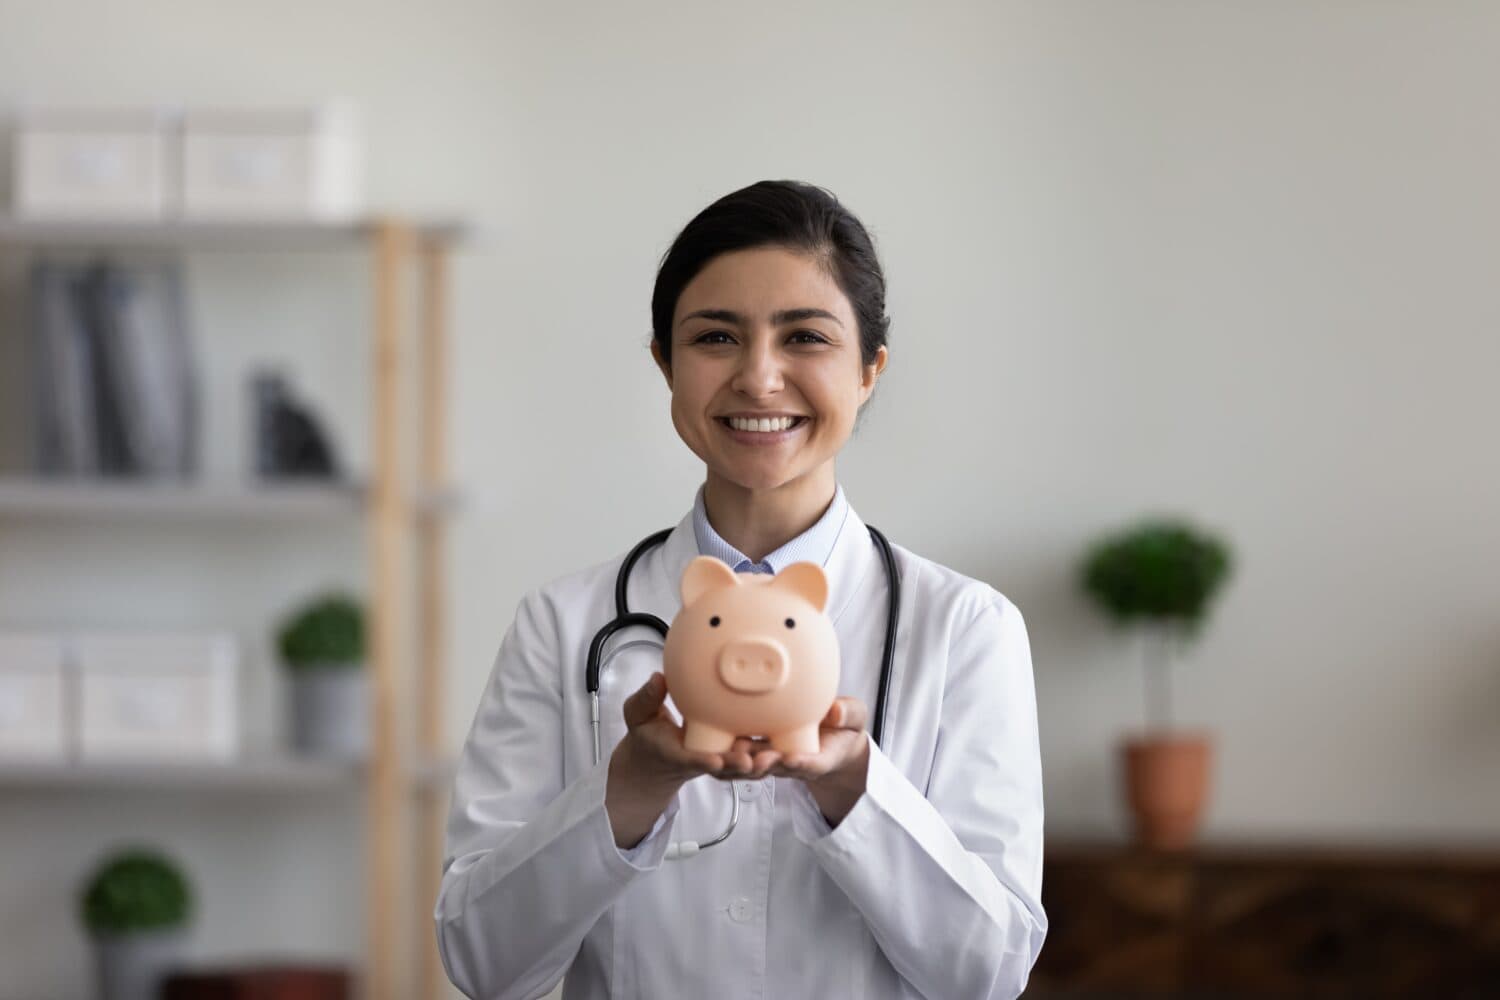 Head shot portrait smiling Indian female doctor physician in white uniform with stethoscope holding pink piggy bank, looking at camera, medical insurance or charity concept, healthcare and medicine